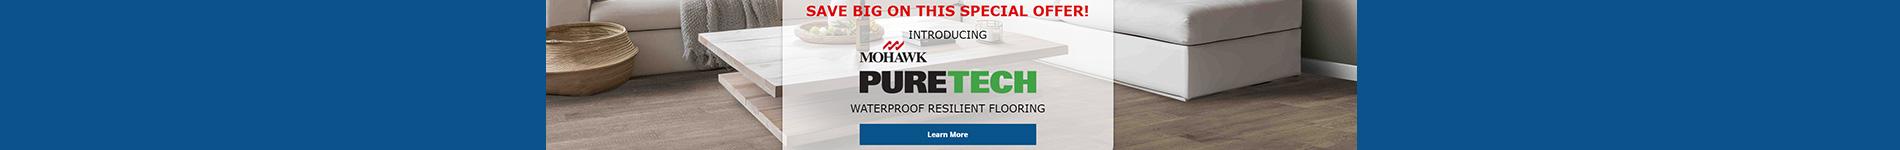 Save Big on this special offer on Mohawk PureTech waterproof resilient flooring. Click to learn more.